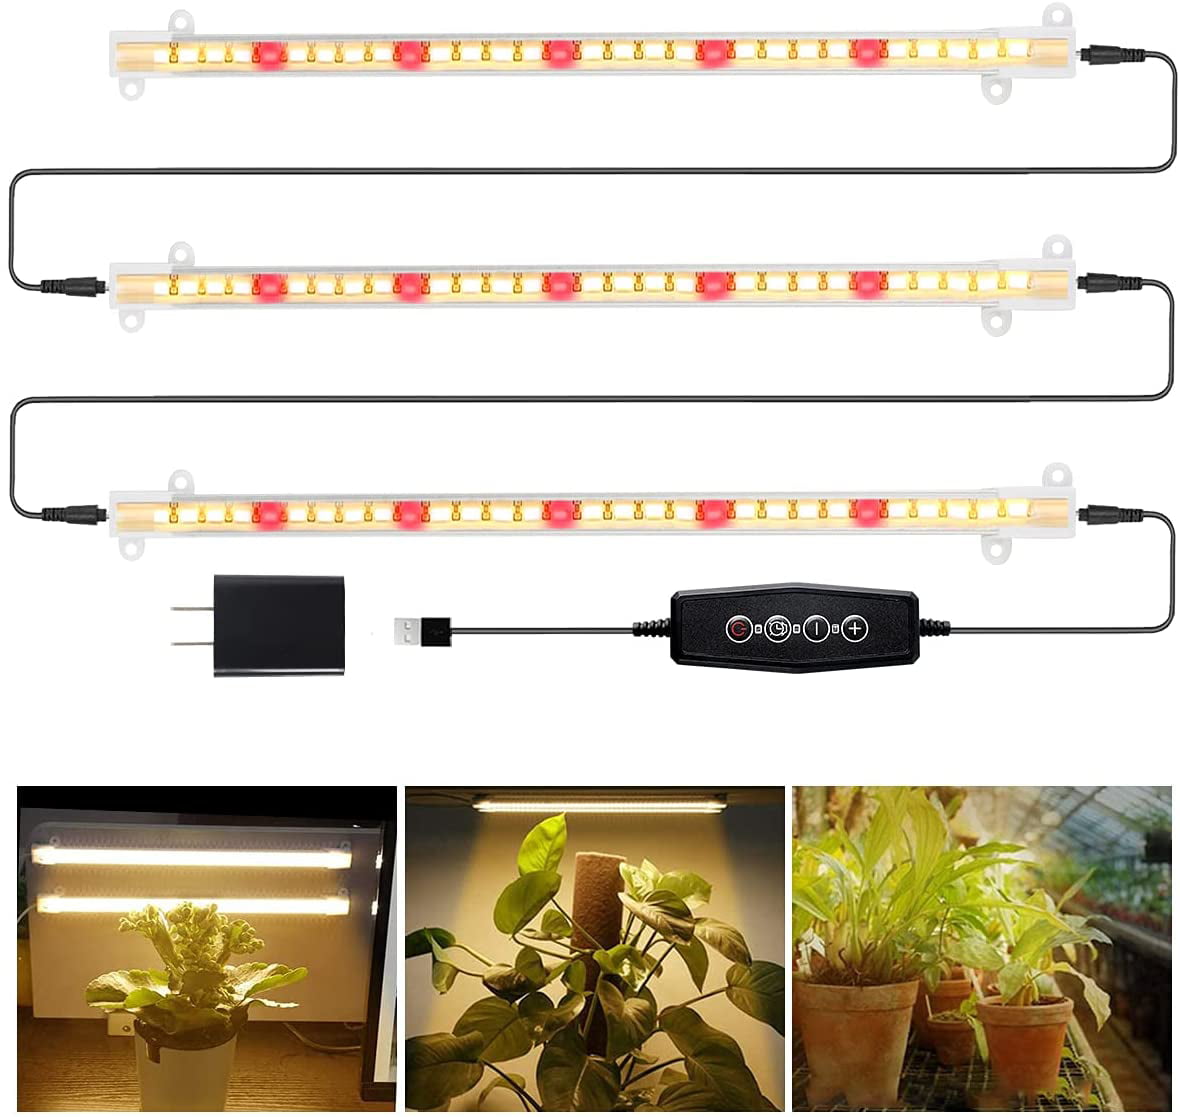 5 Dimmable & Auto On/Off 4/8/12H LED Grow Light Strip Juhefa 60W 3500K Sunlike Full Spectrum Plant Light Bar with 50 White/10 Deep Red Bulbs for Indoor Plants